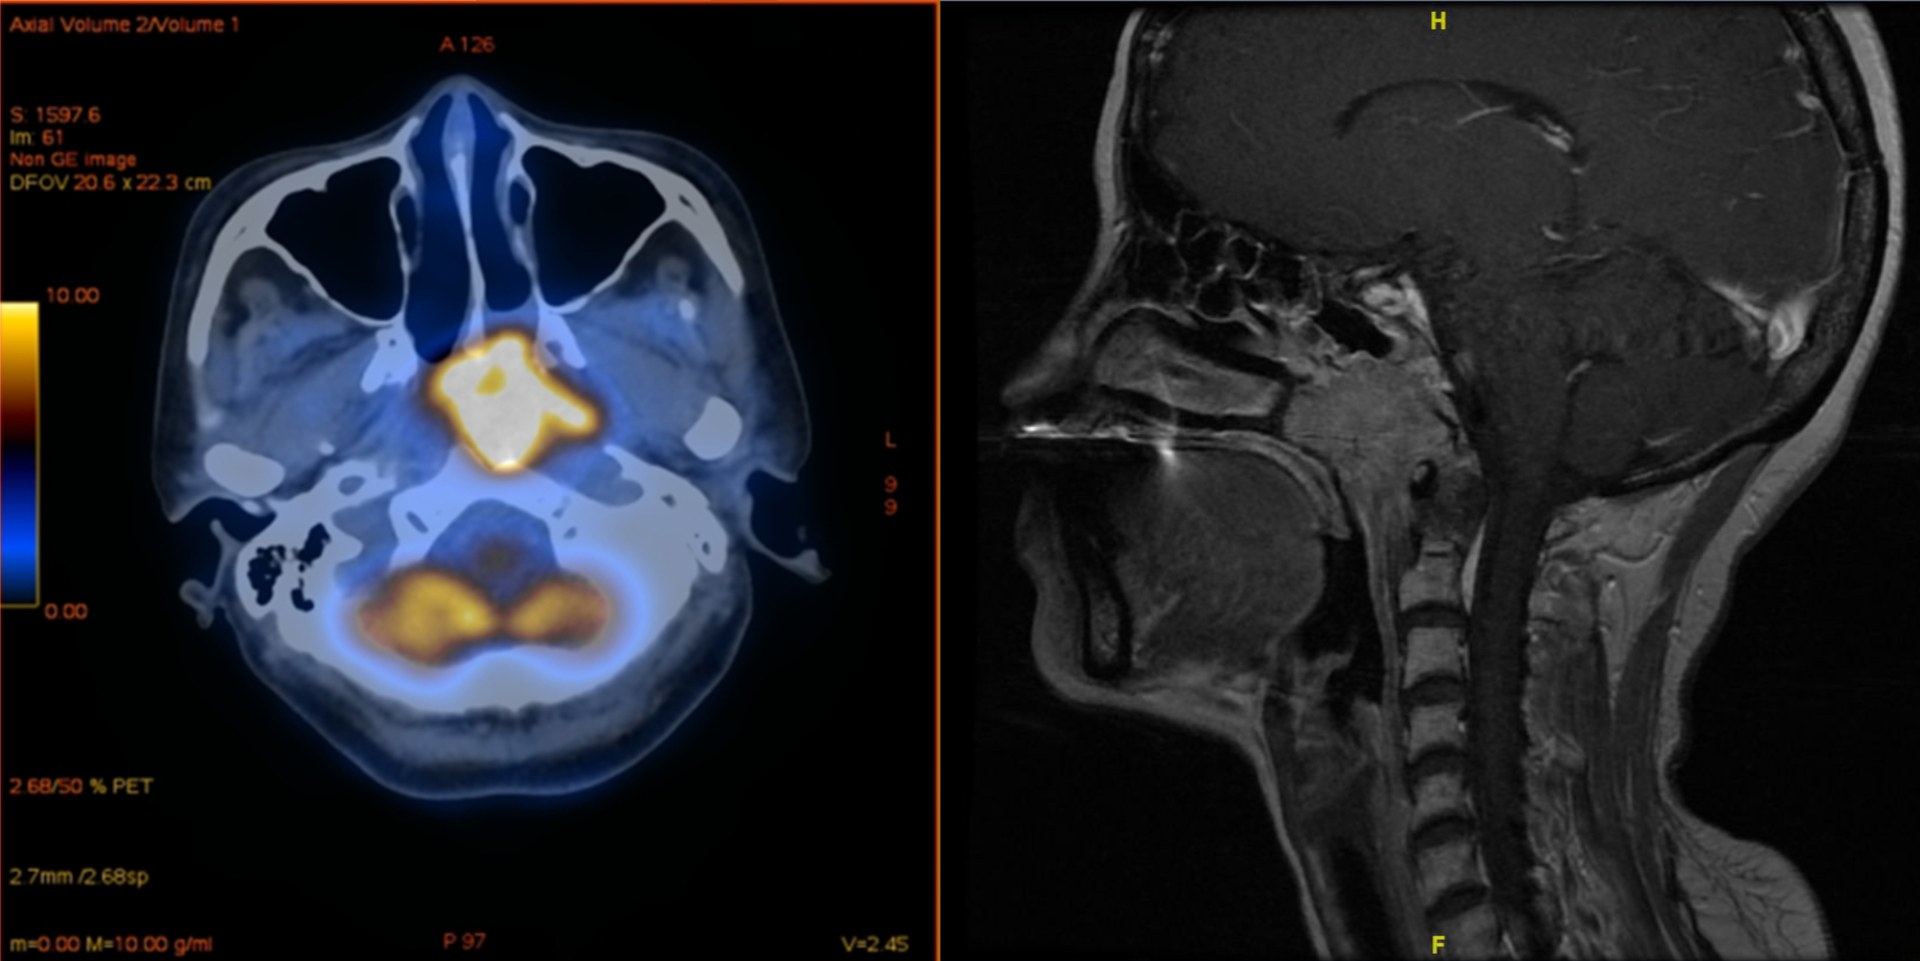 Nasopharyngeal tumors (highlighted in yellow)